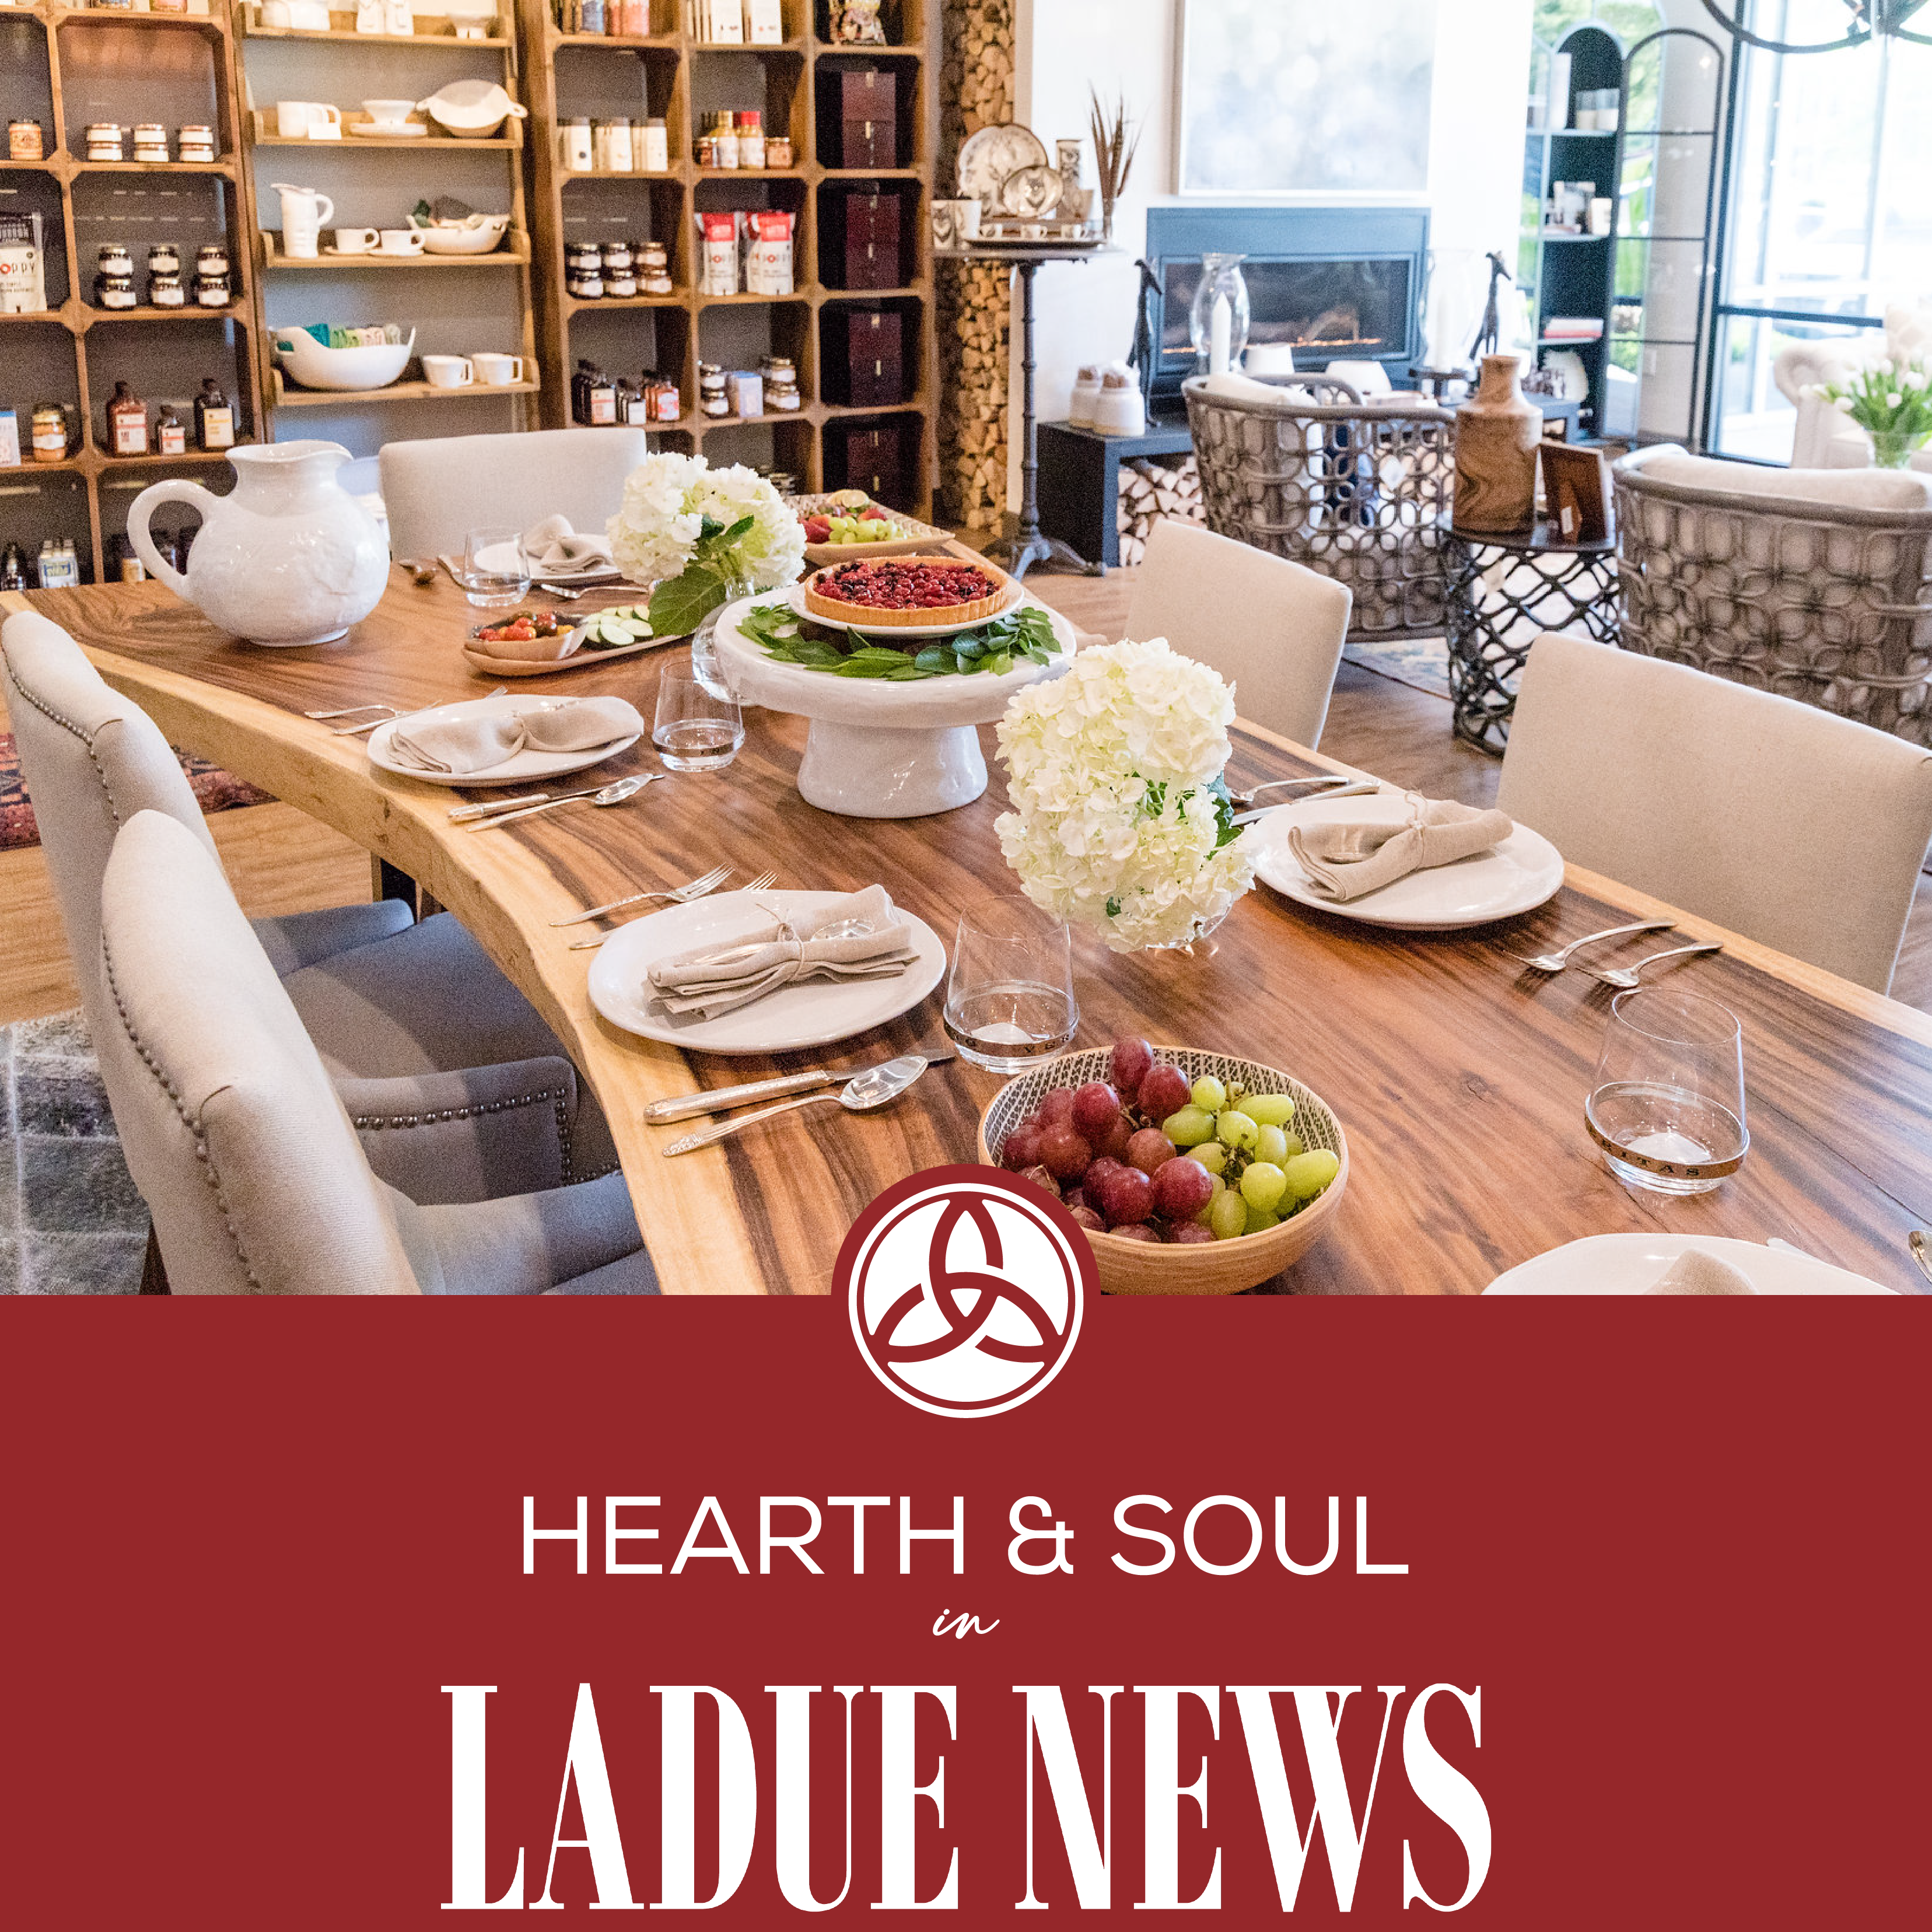 Hearth & Soul home goods shop and gathering space set to open in Ladue.